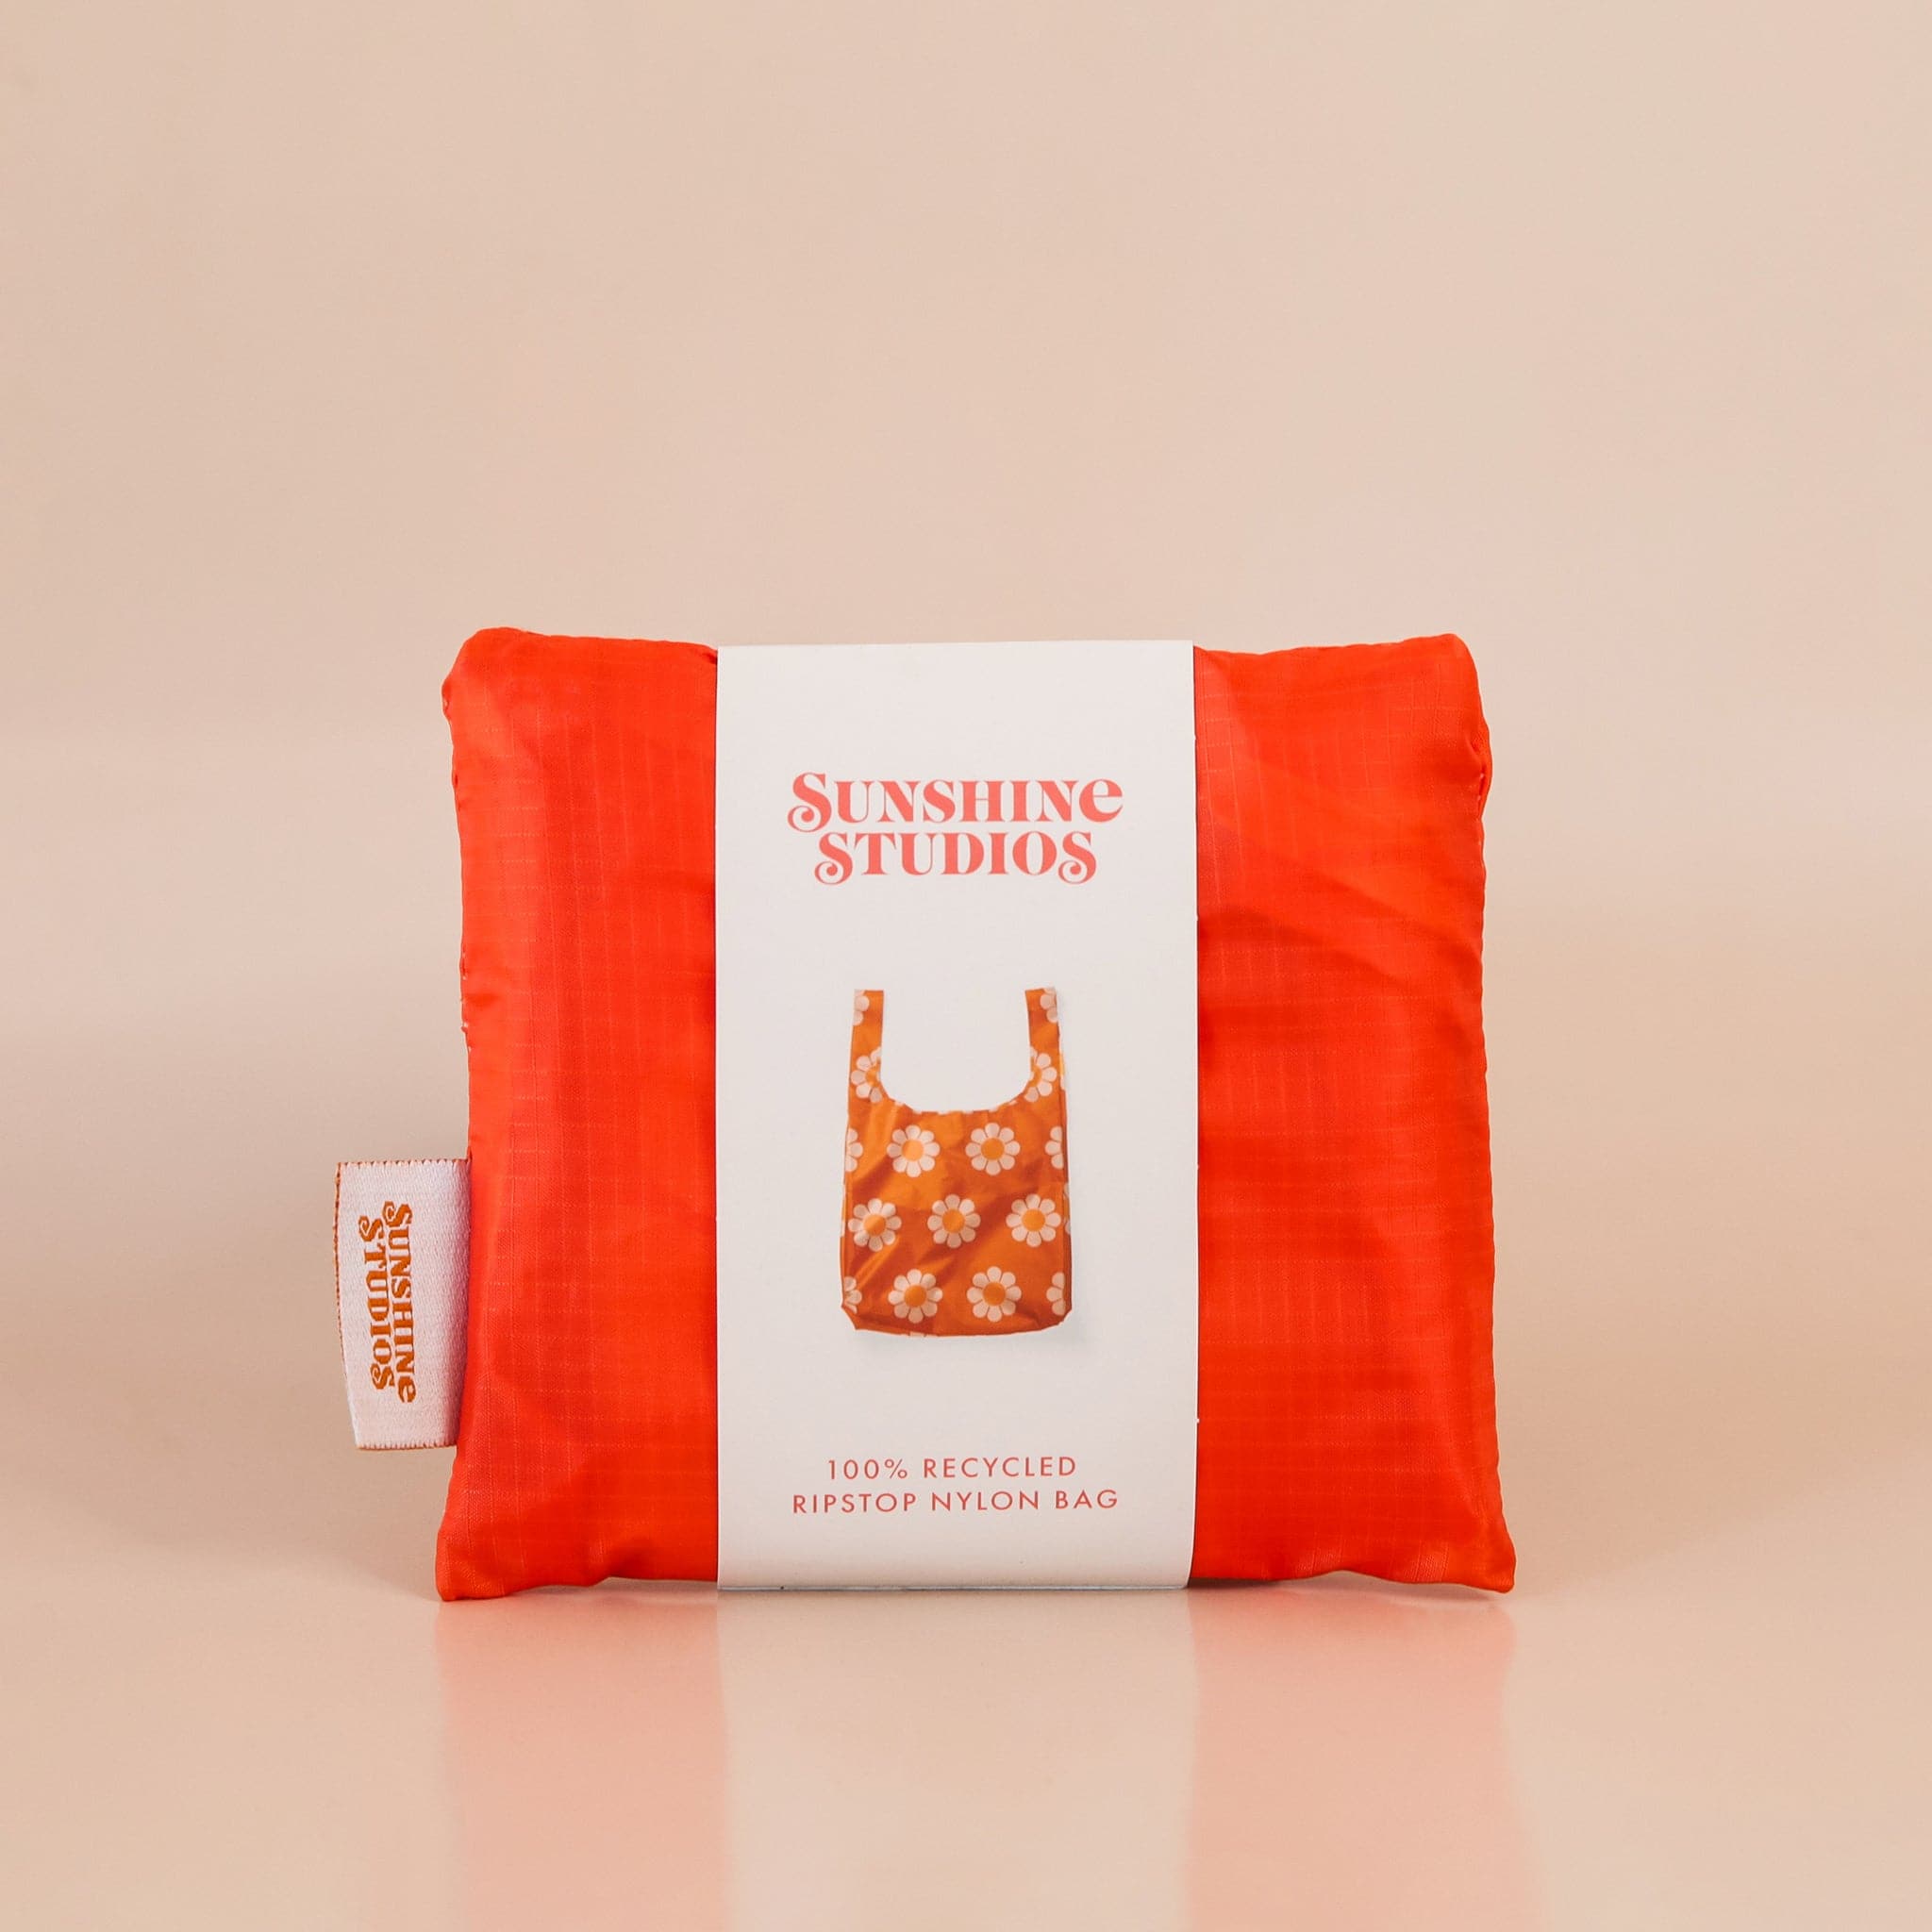 Folded up red-orange reusable bag folded into a small square within white wrap around packaging that reads &#39;sunshine studios&#39;. The label has a photo of the bag unfolded and reads &#39;100% recycled ripstop nylon bag&#39;